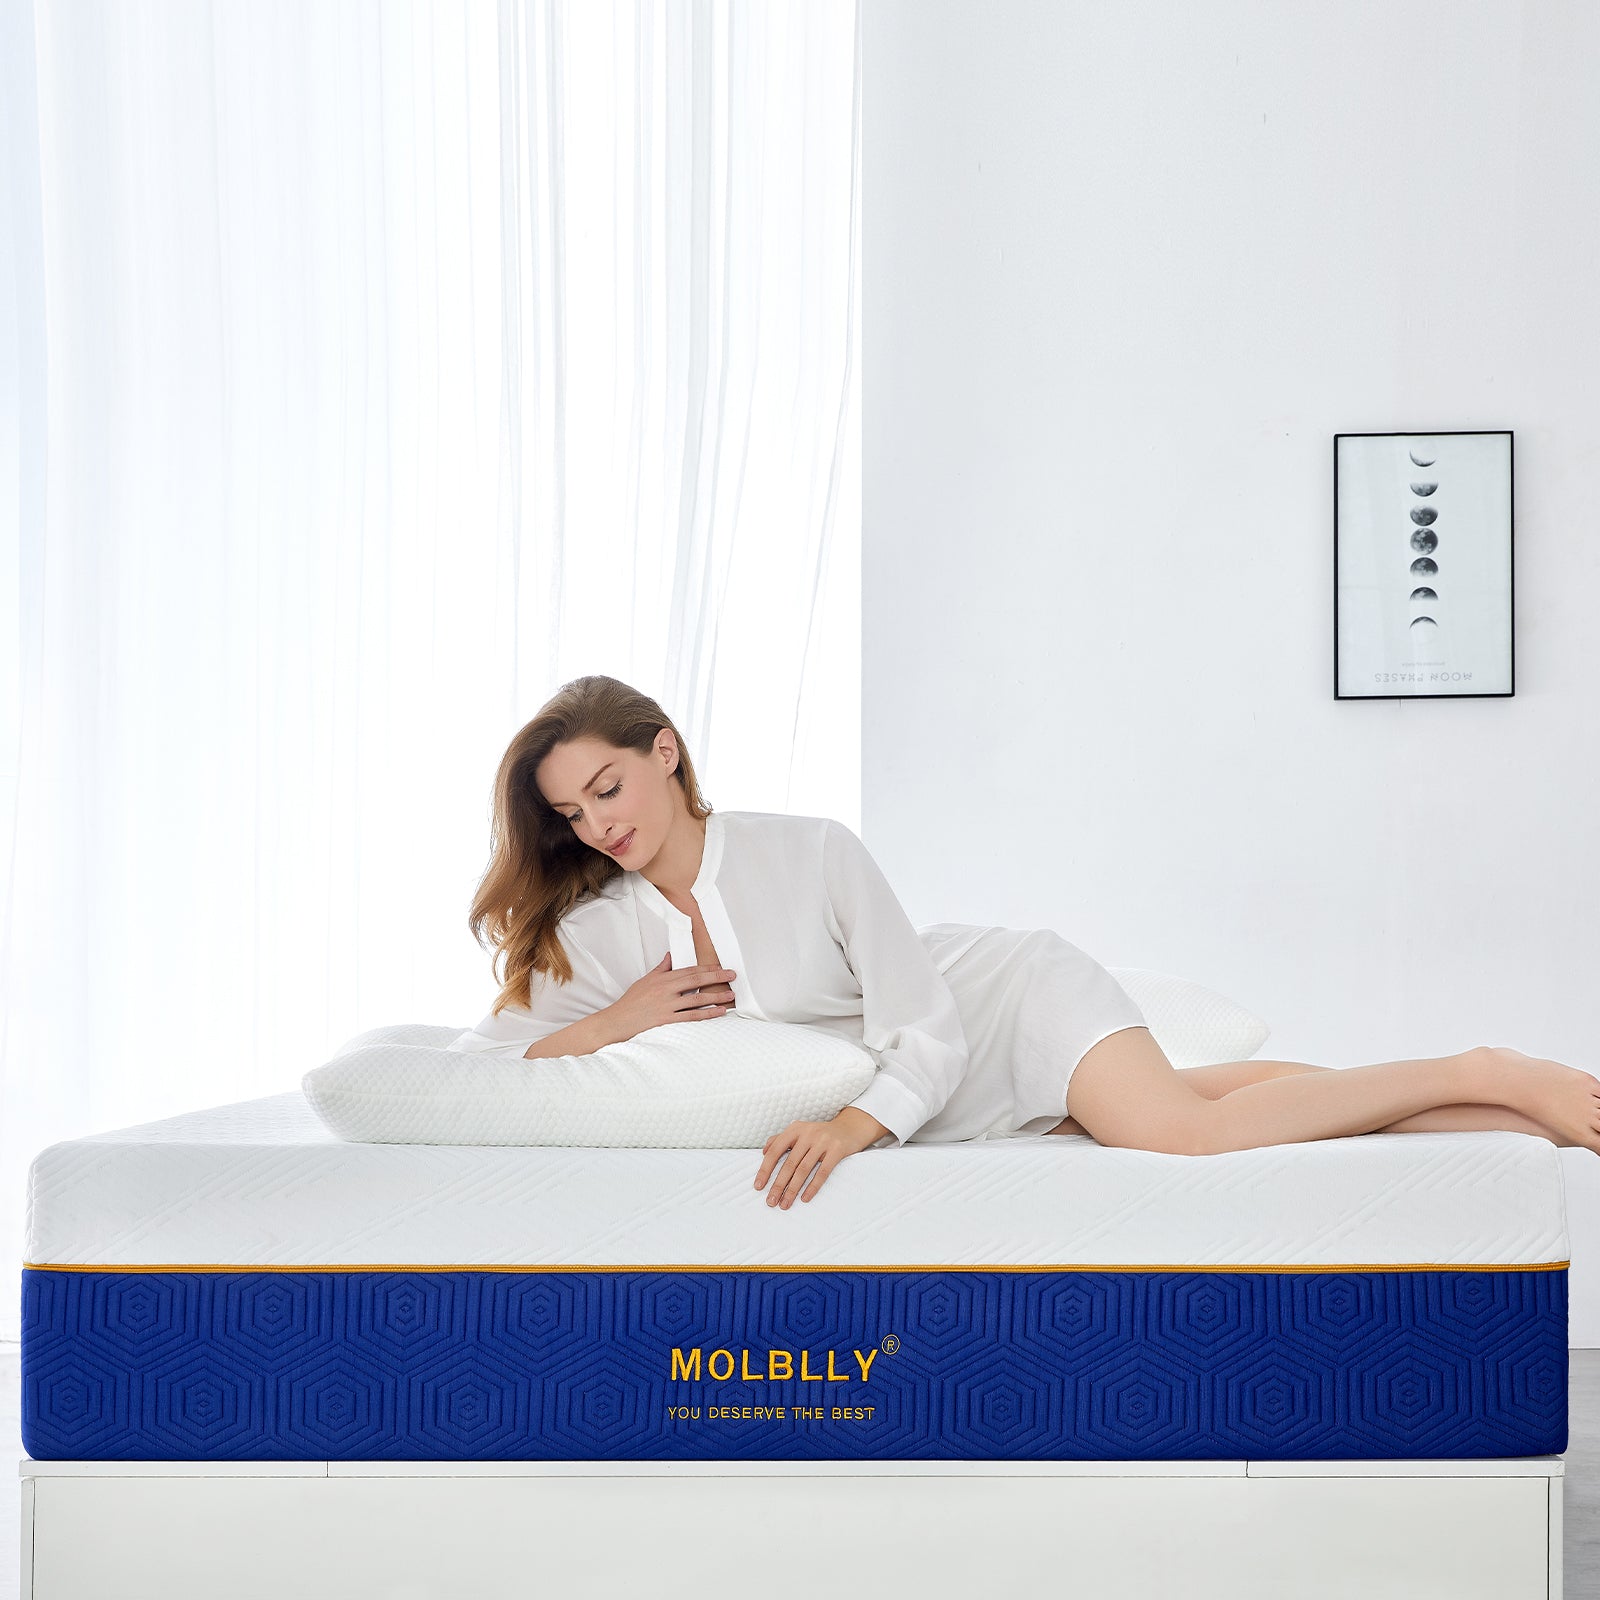 Memory foam vs. Hybrid: which is the most comfortable sleep style?